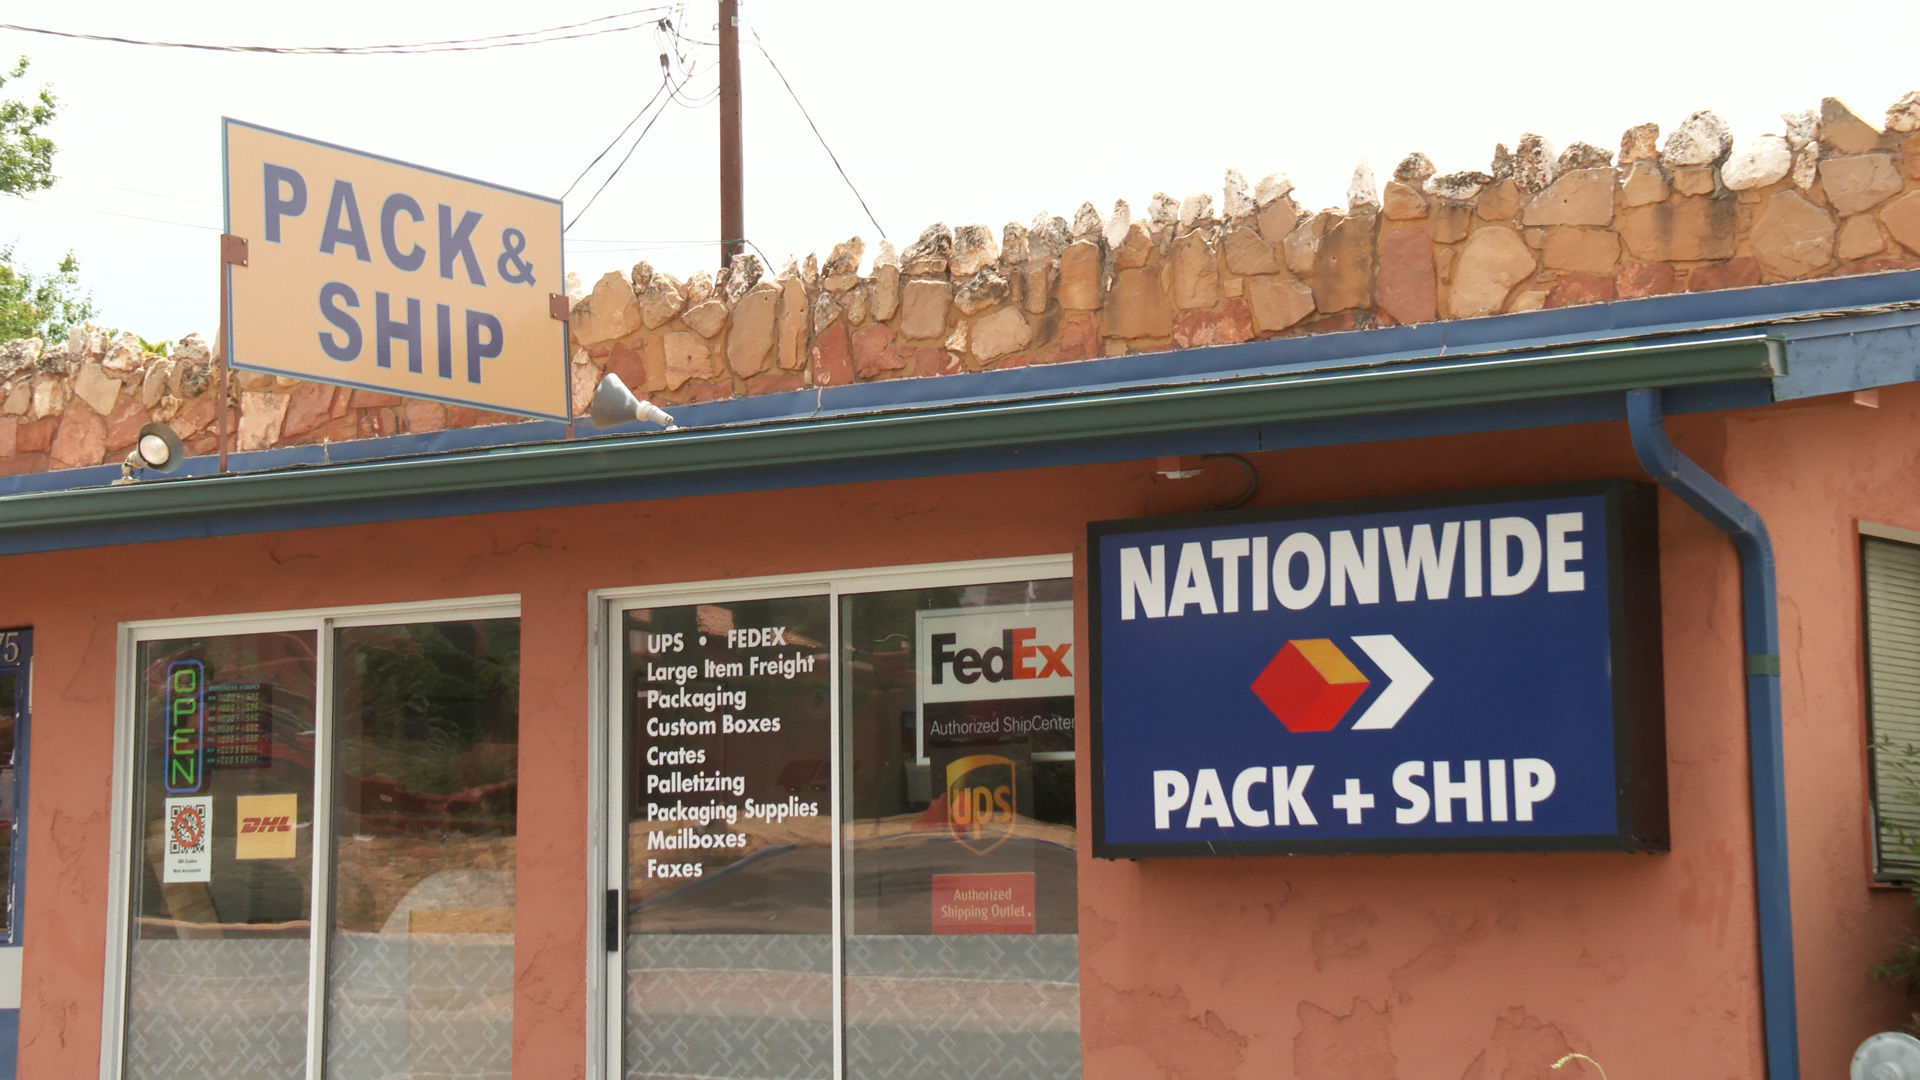 Nationwide Pack and Ship building in Sedona, Arizona